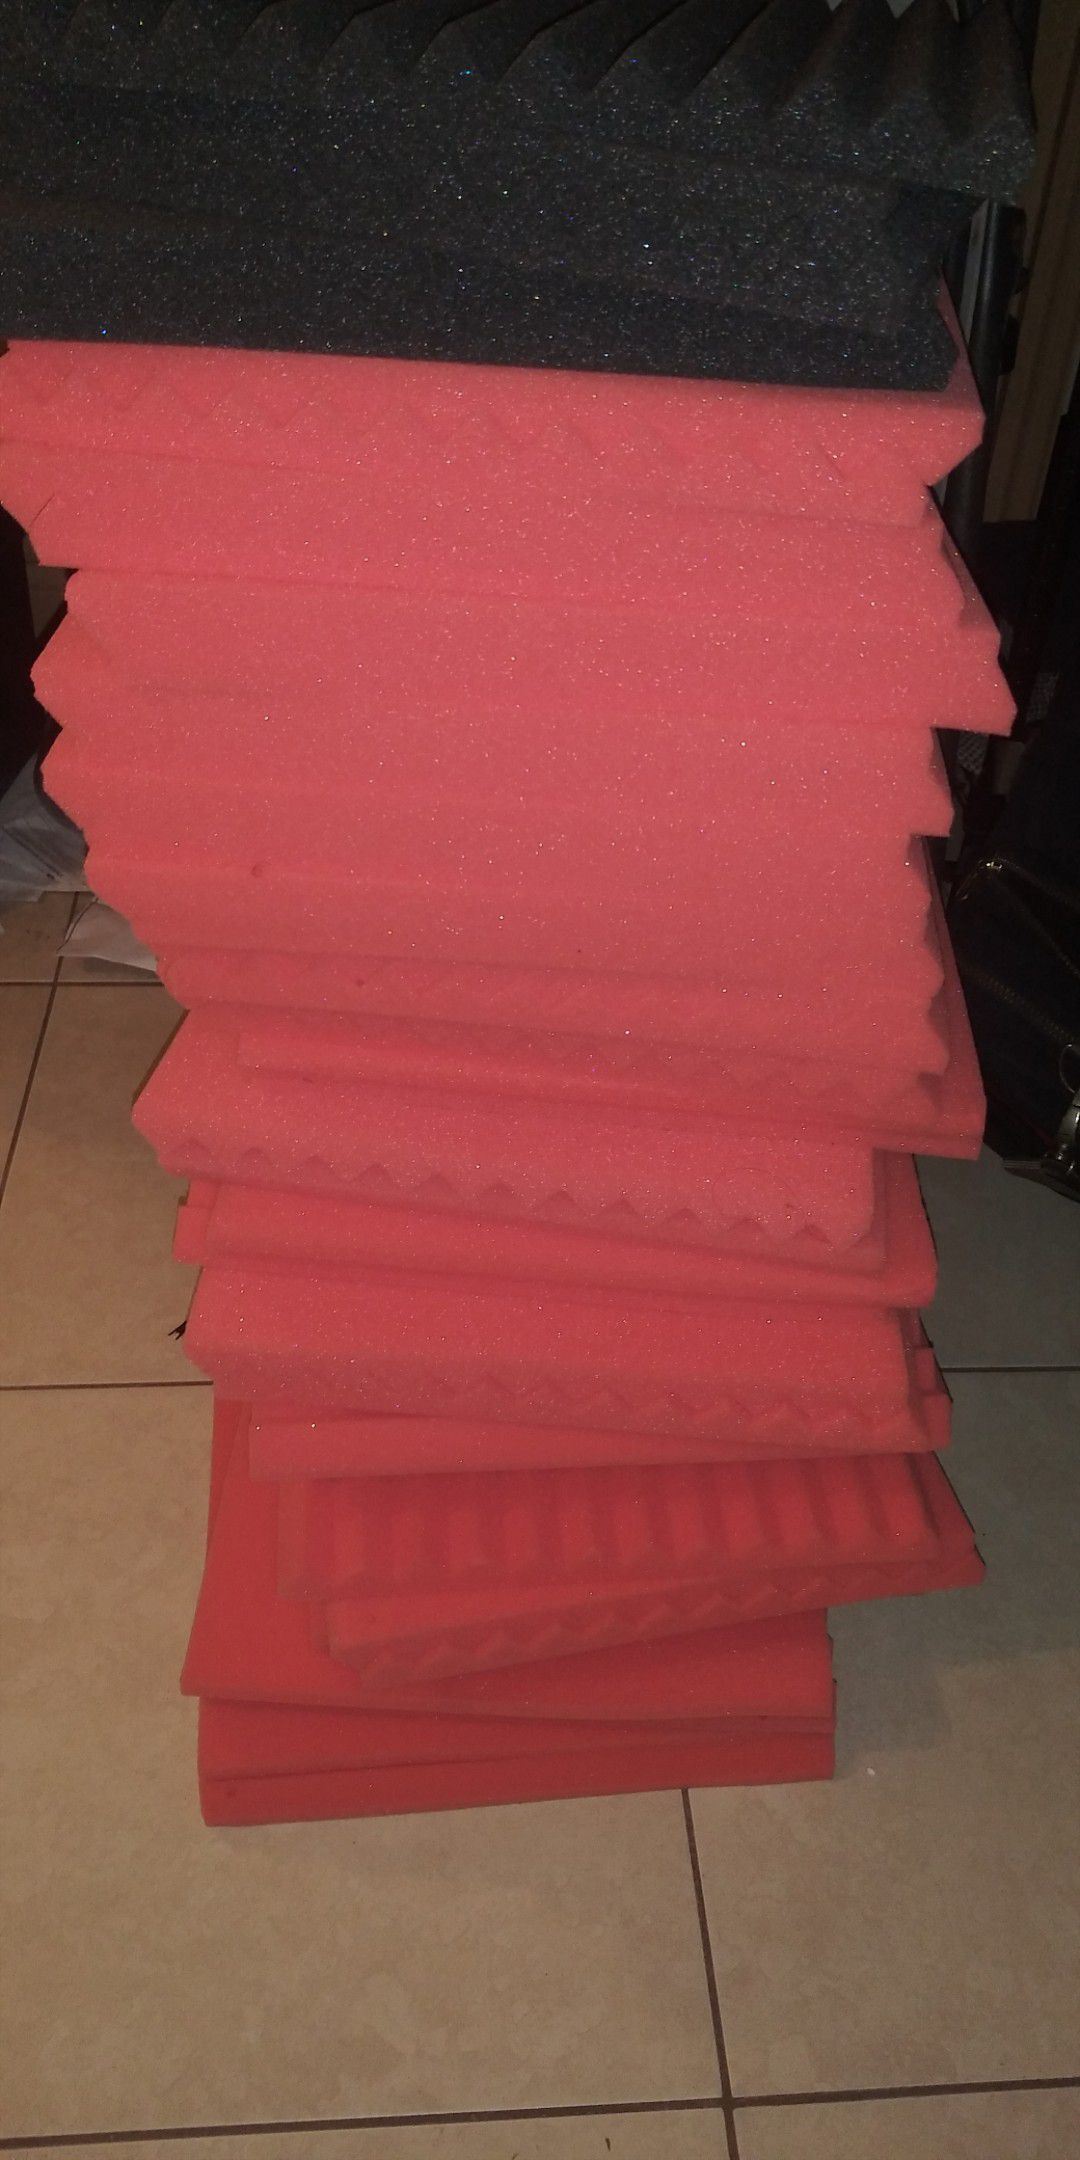 10 Red High Quality Acoustic Foam Panels for $25.99